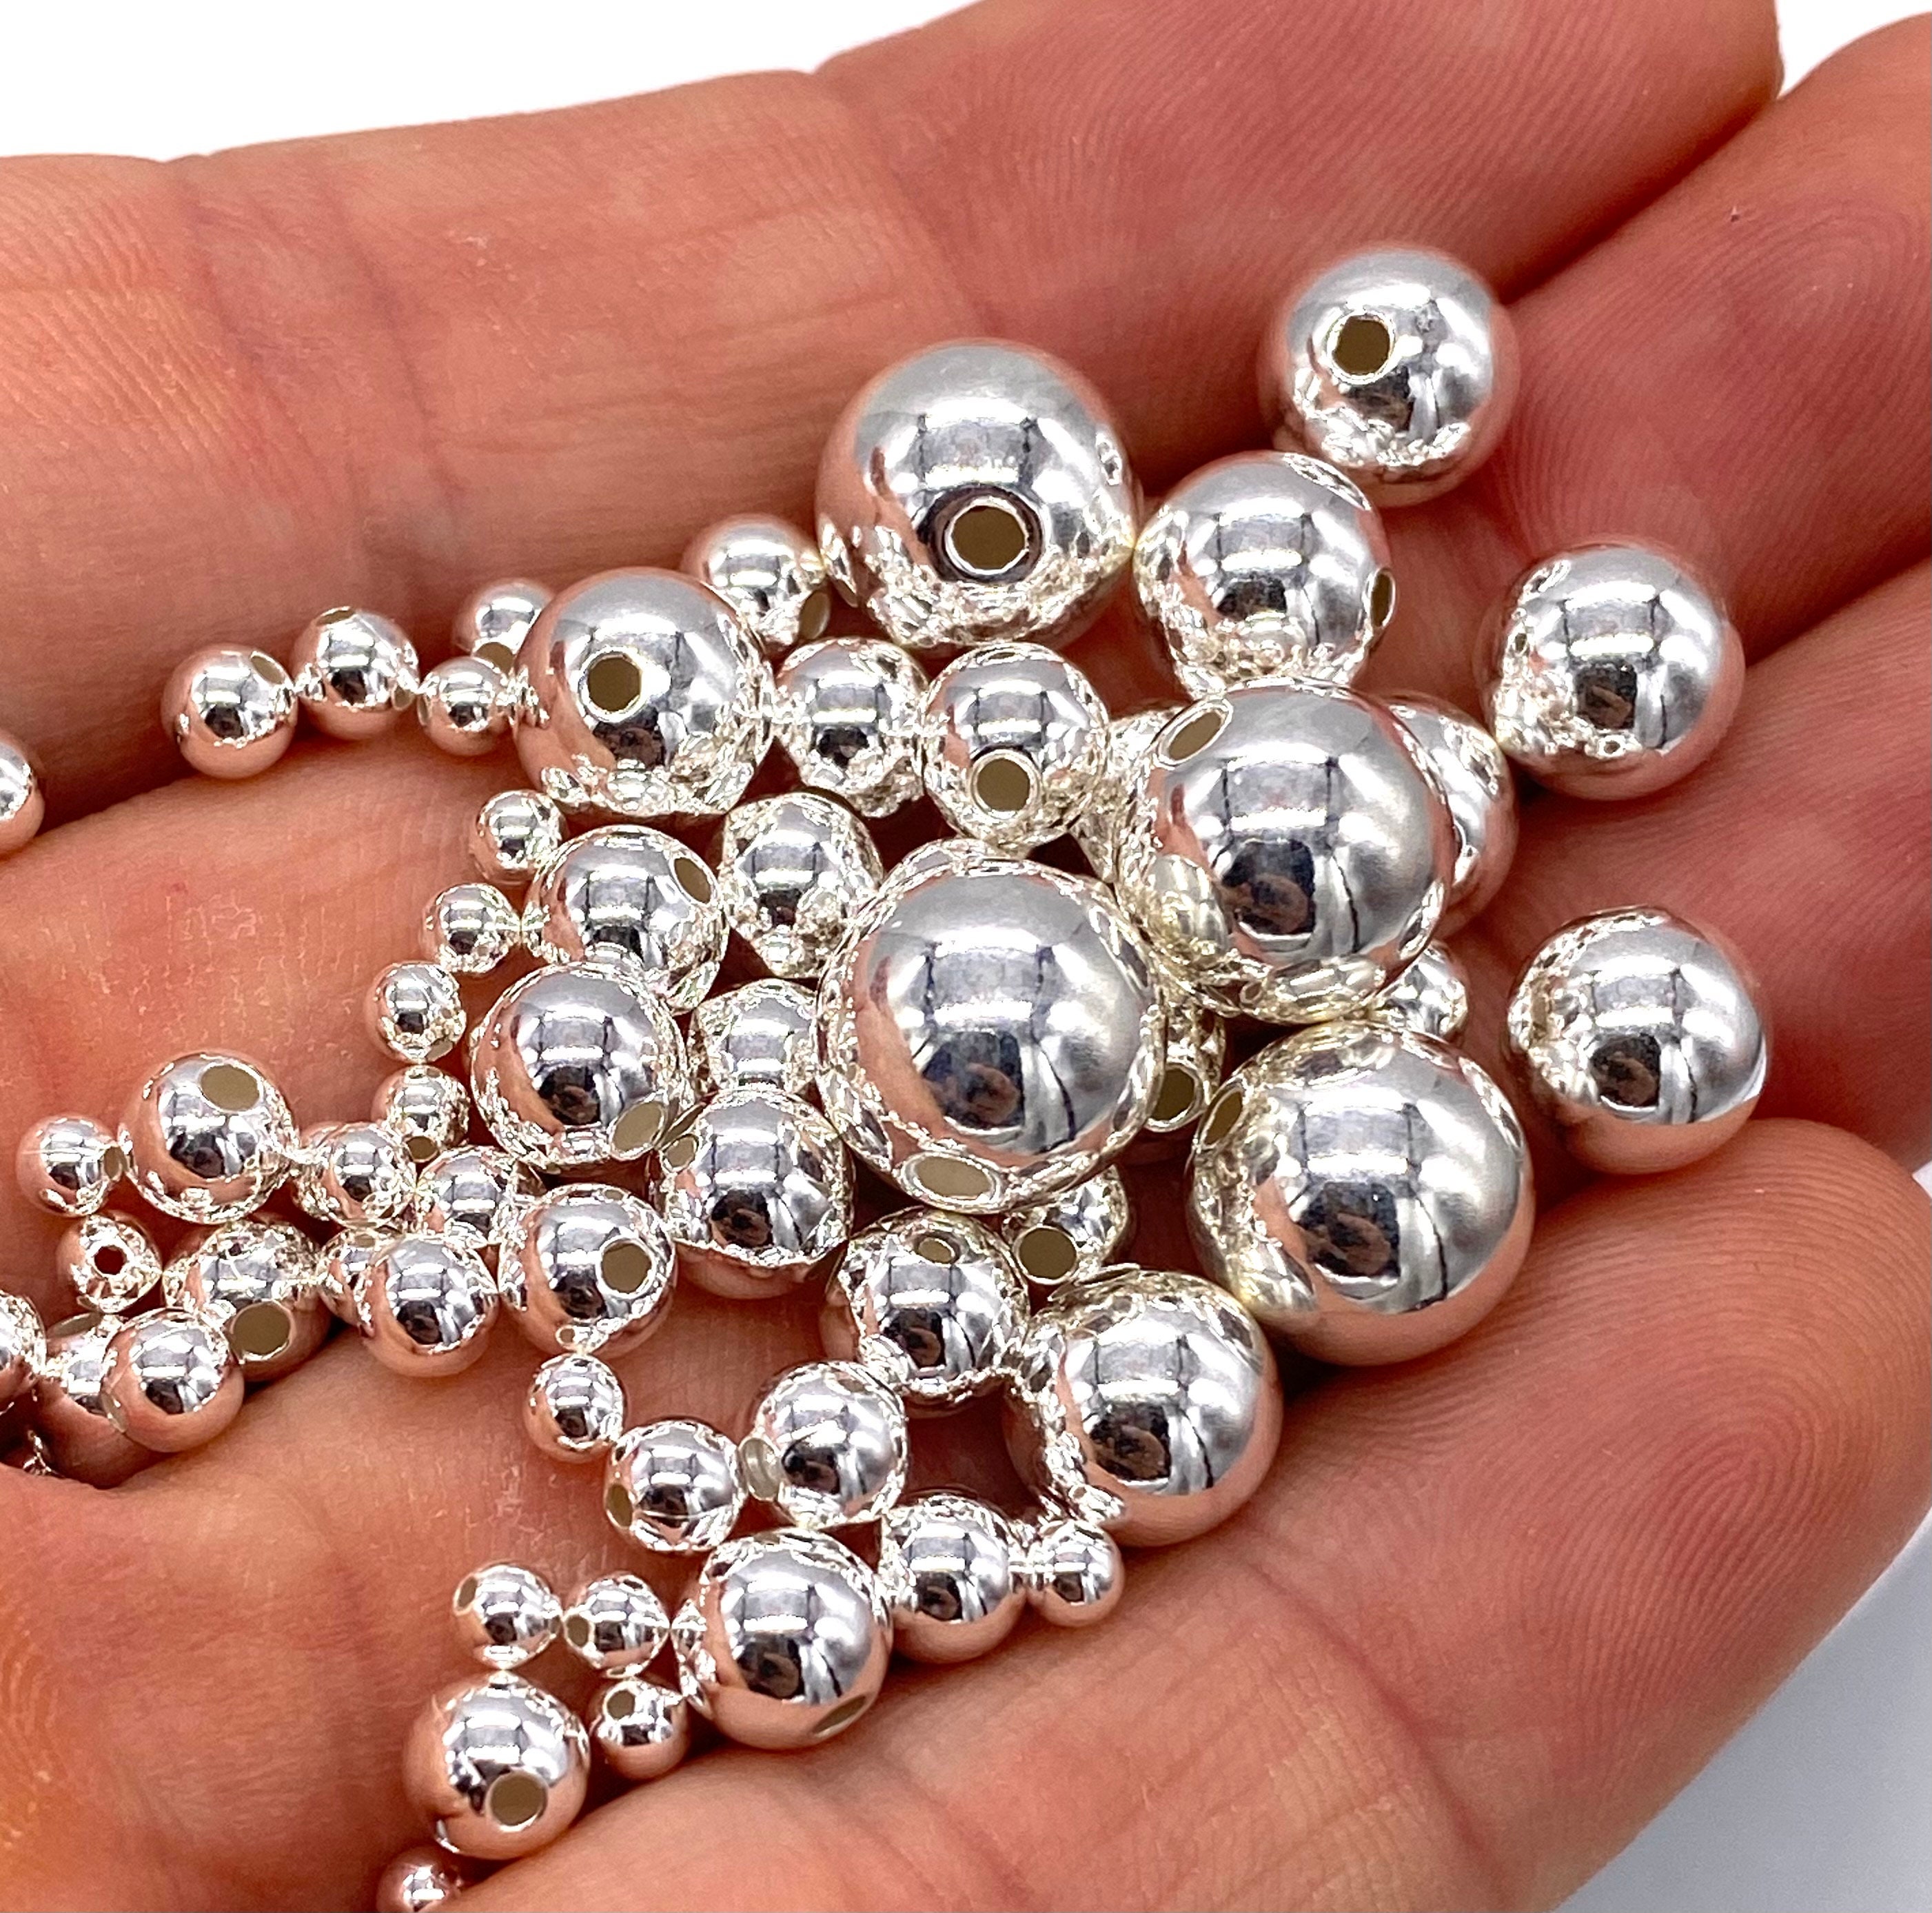 925 Sterling Silver Balls Beads Finding to Make Your Own Chain